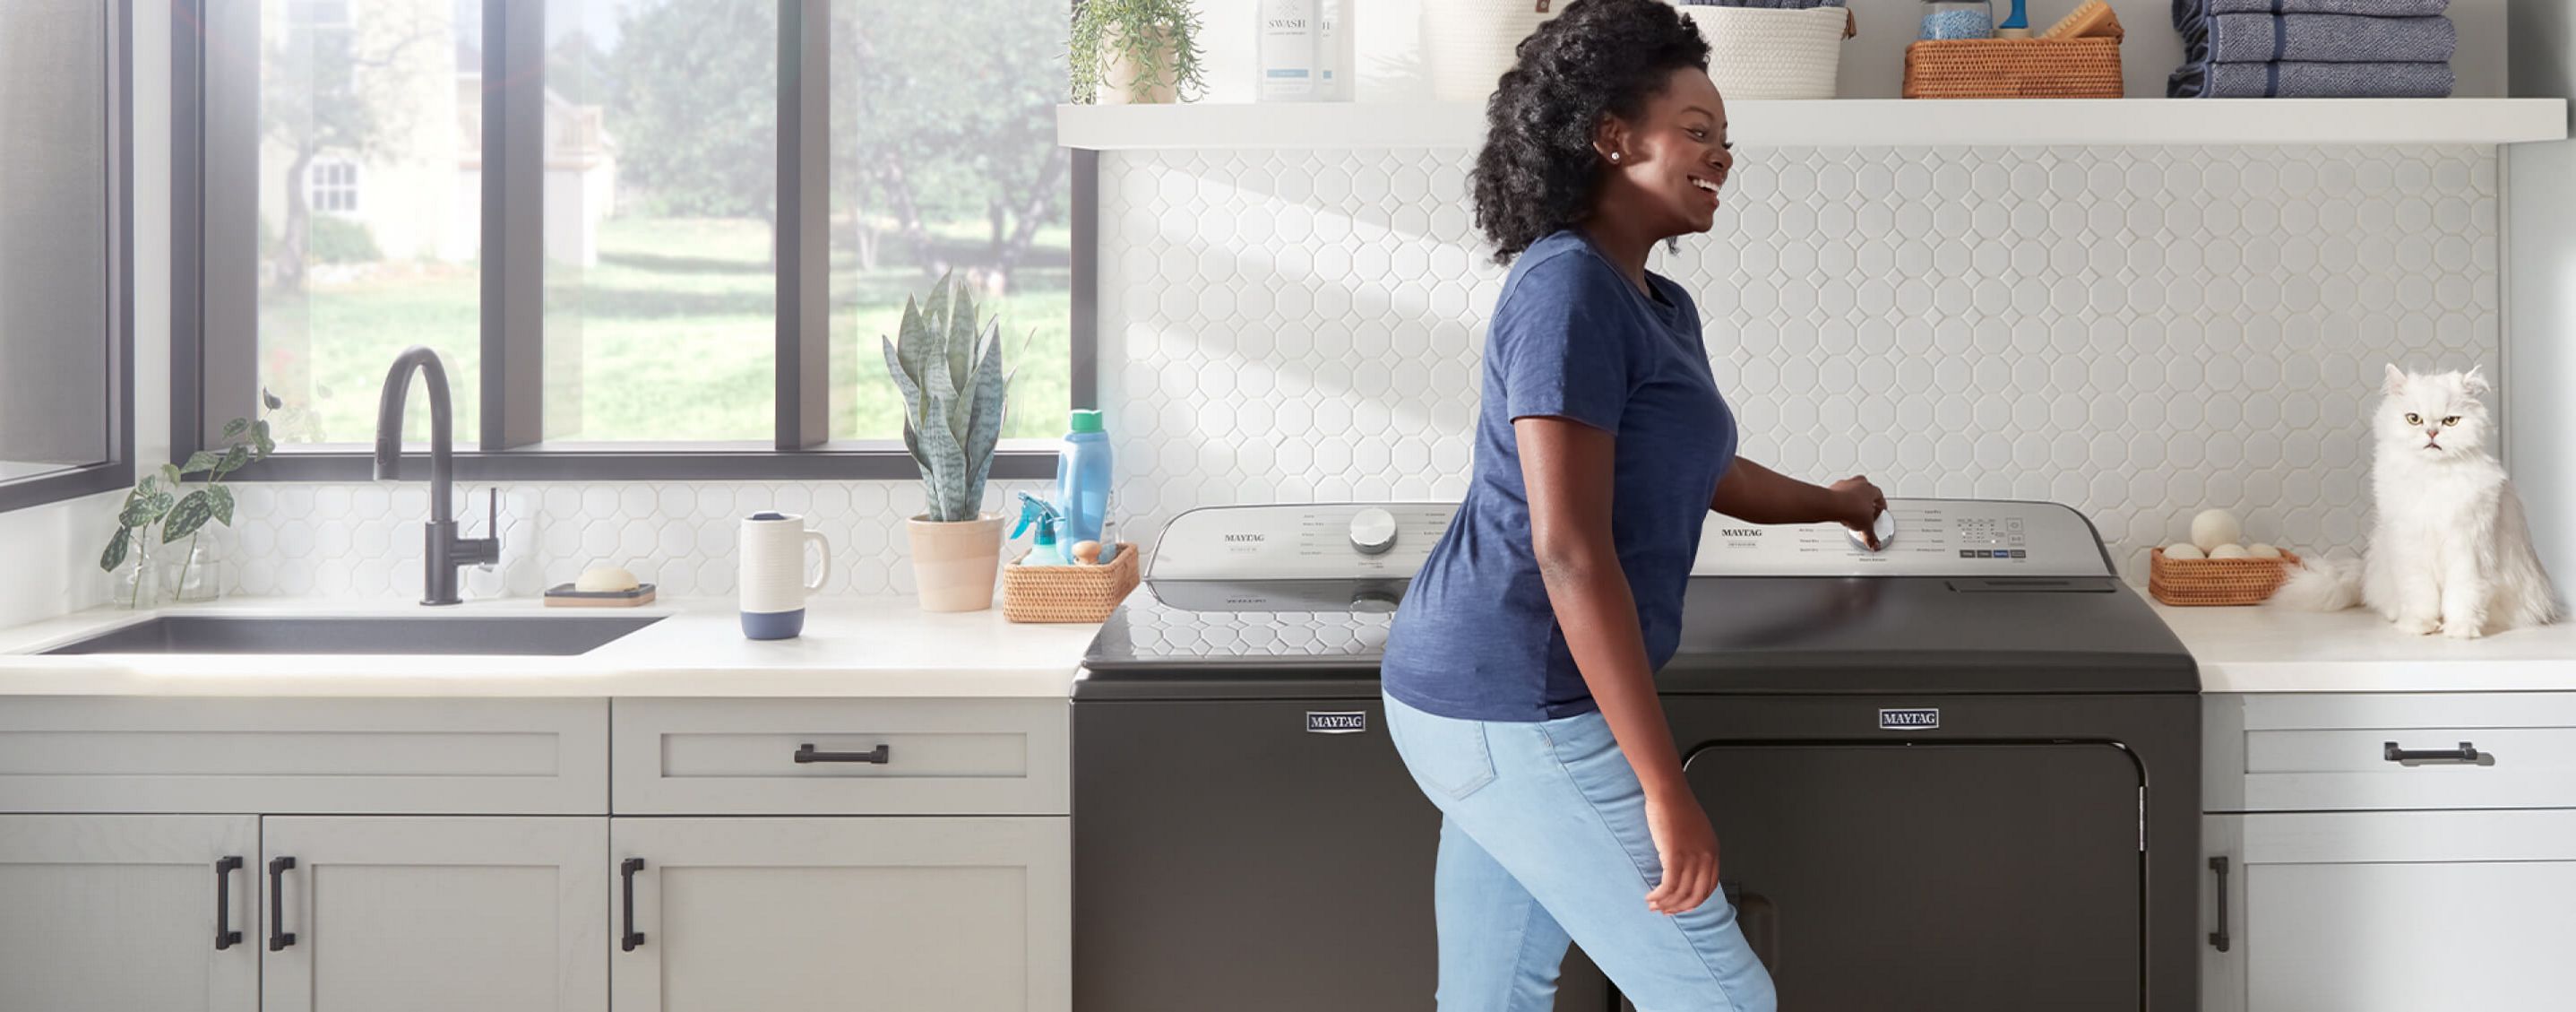 A Maytag® washer and dryer set.